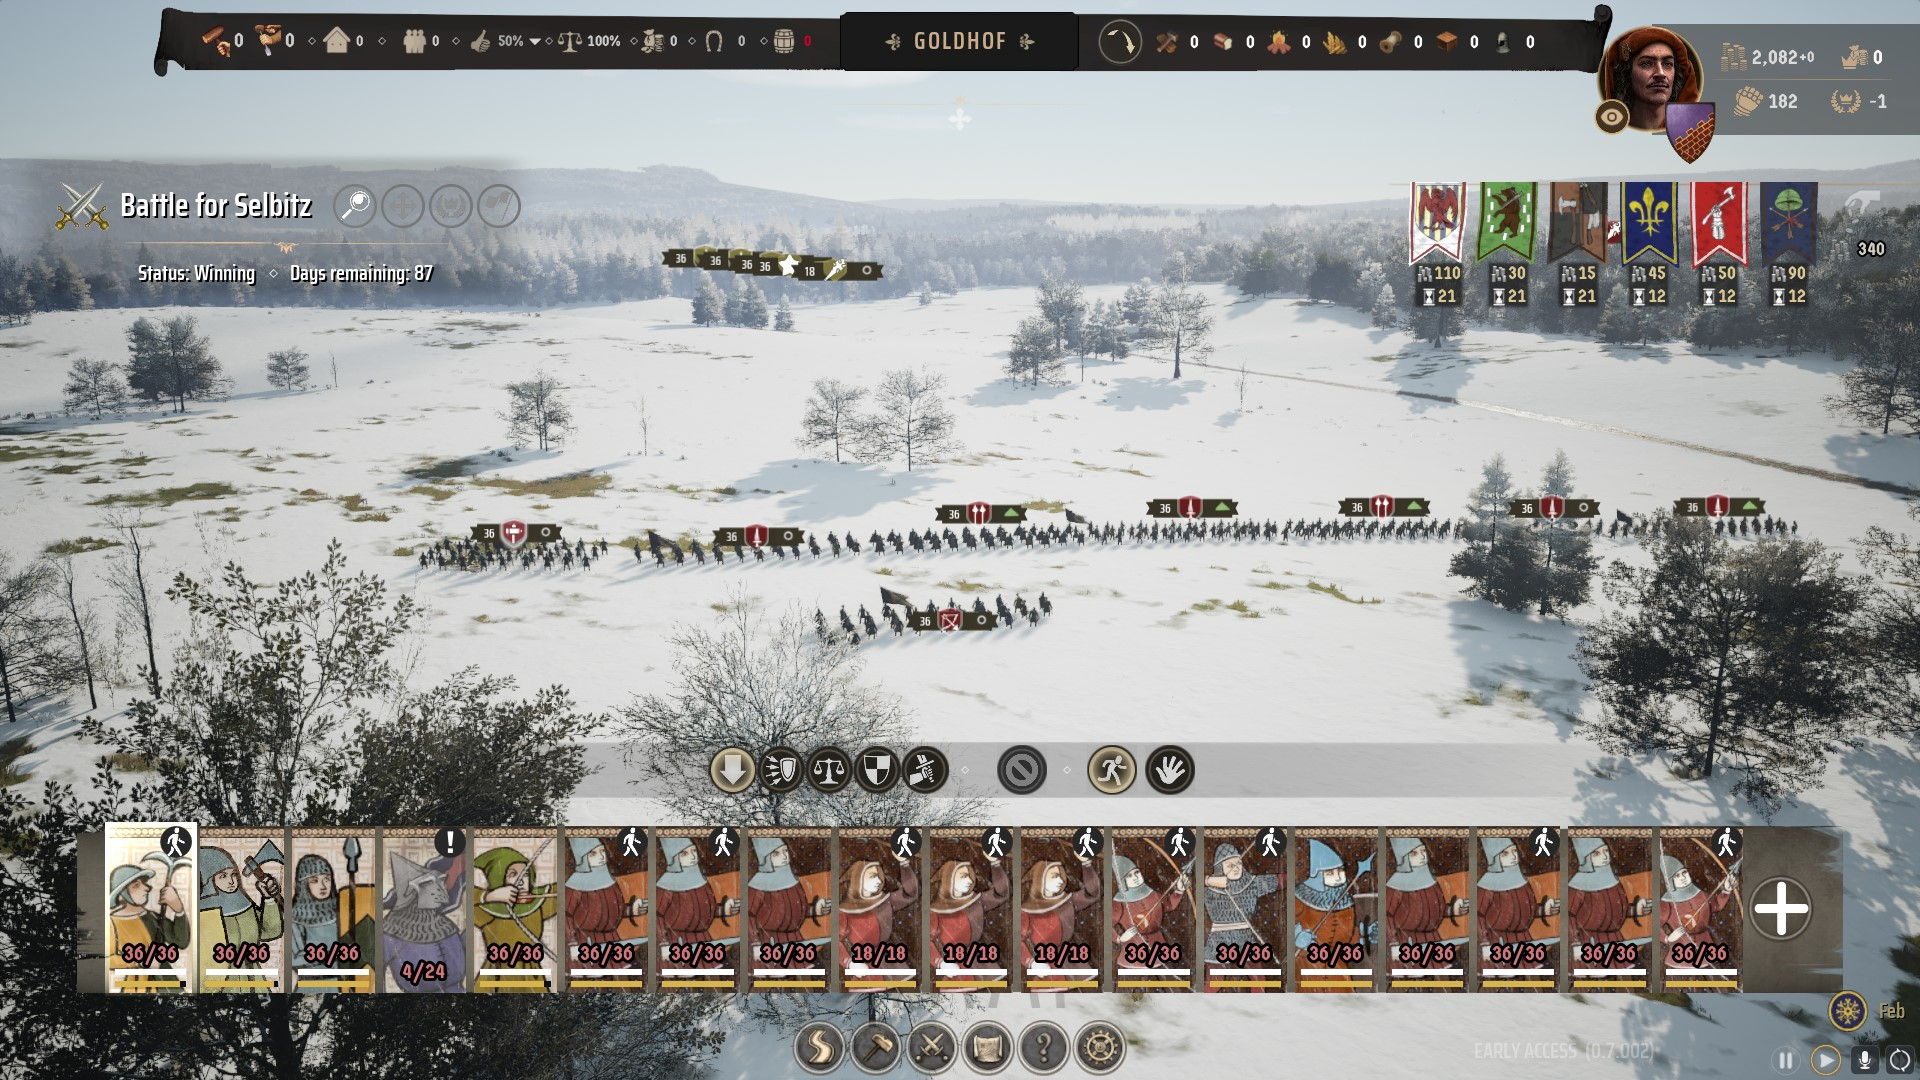 A snowy battlefield in the game Manor Lords